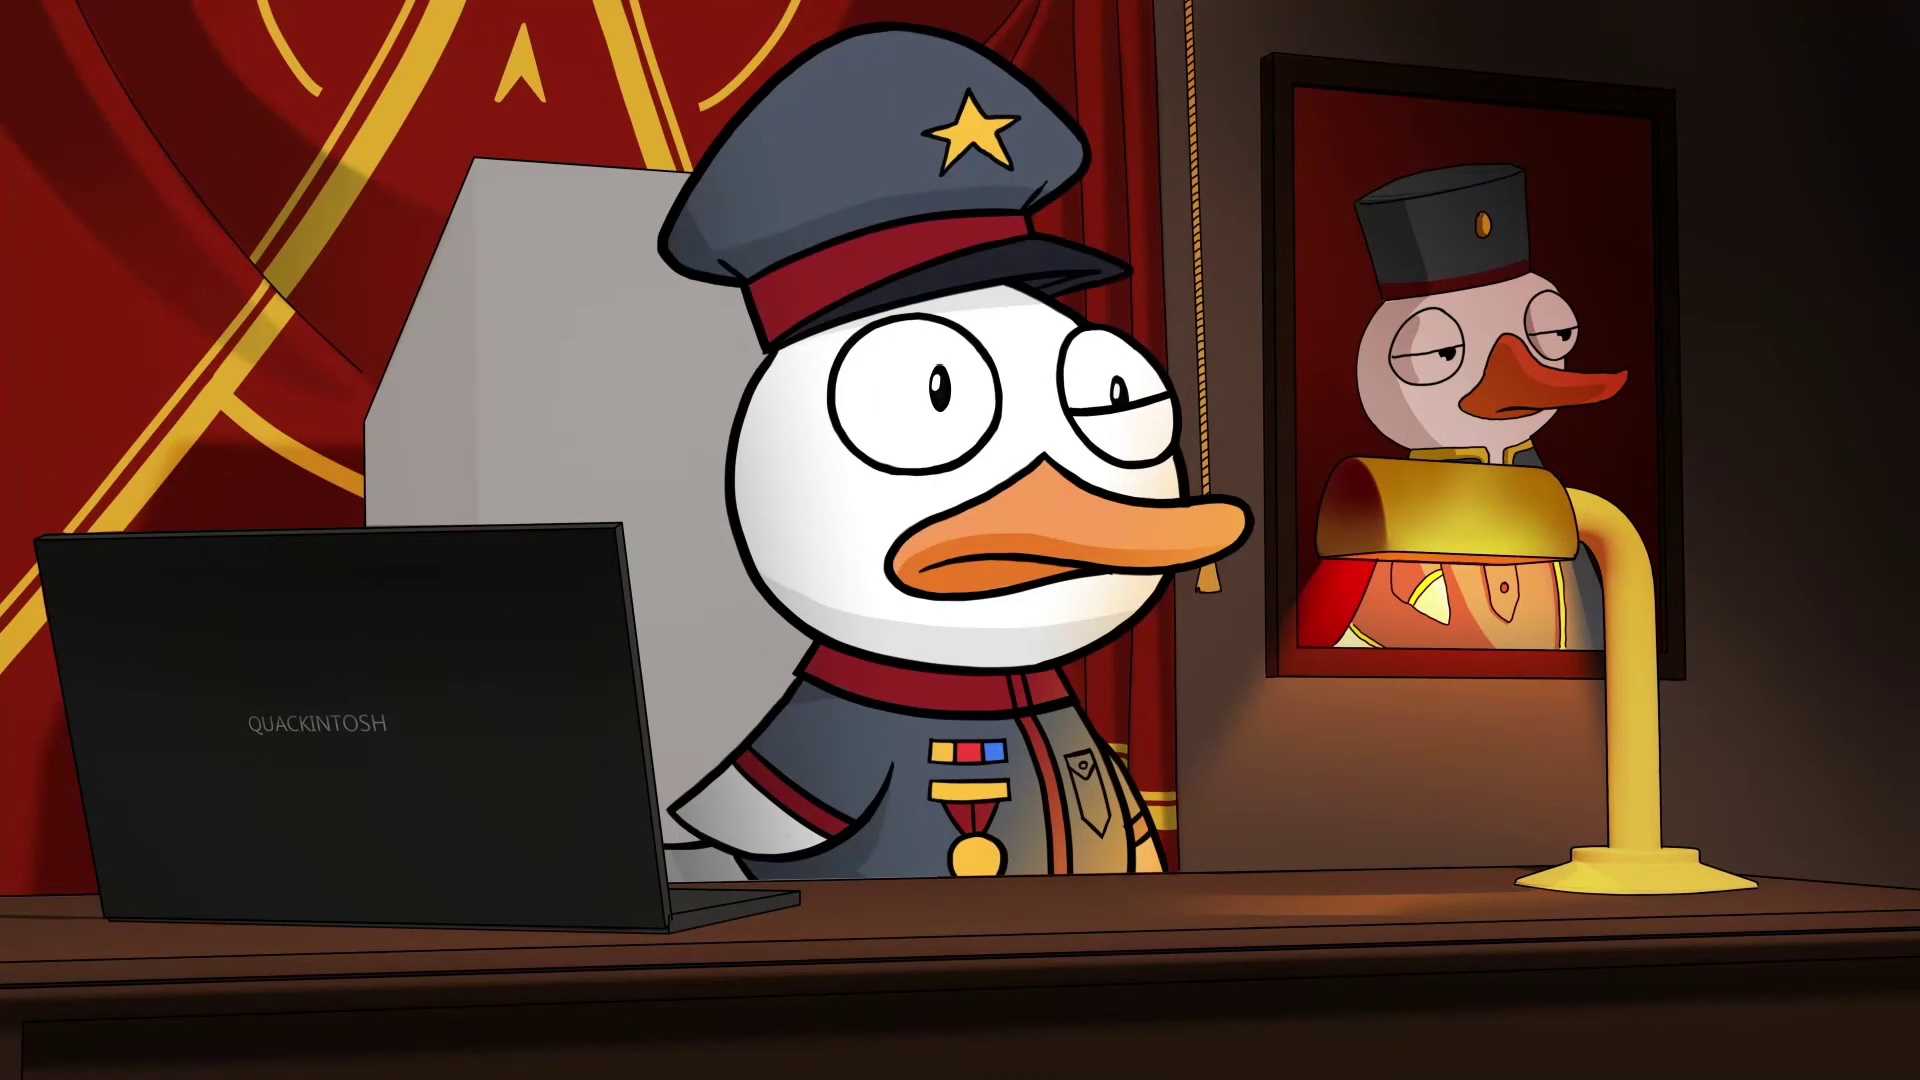 Гусь гусь даг. Goose Goose Duck. Гус Гус дак игра. Steam Goose Goose Duck игра. Эспер Goose Goose Duck.